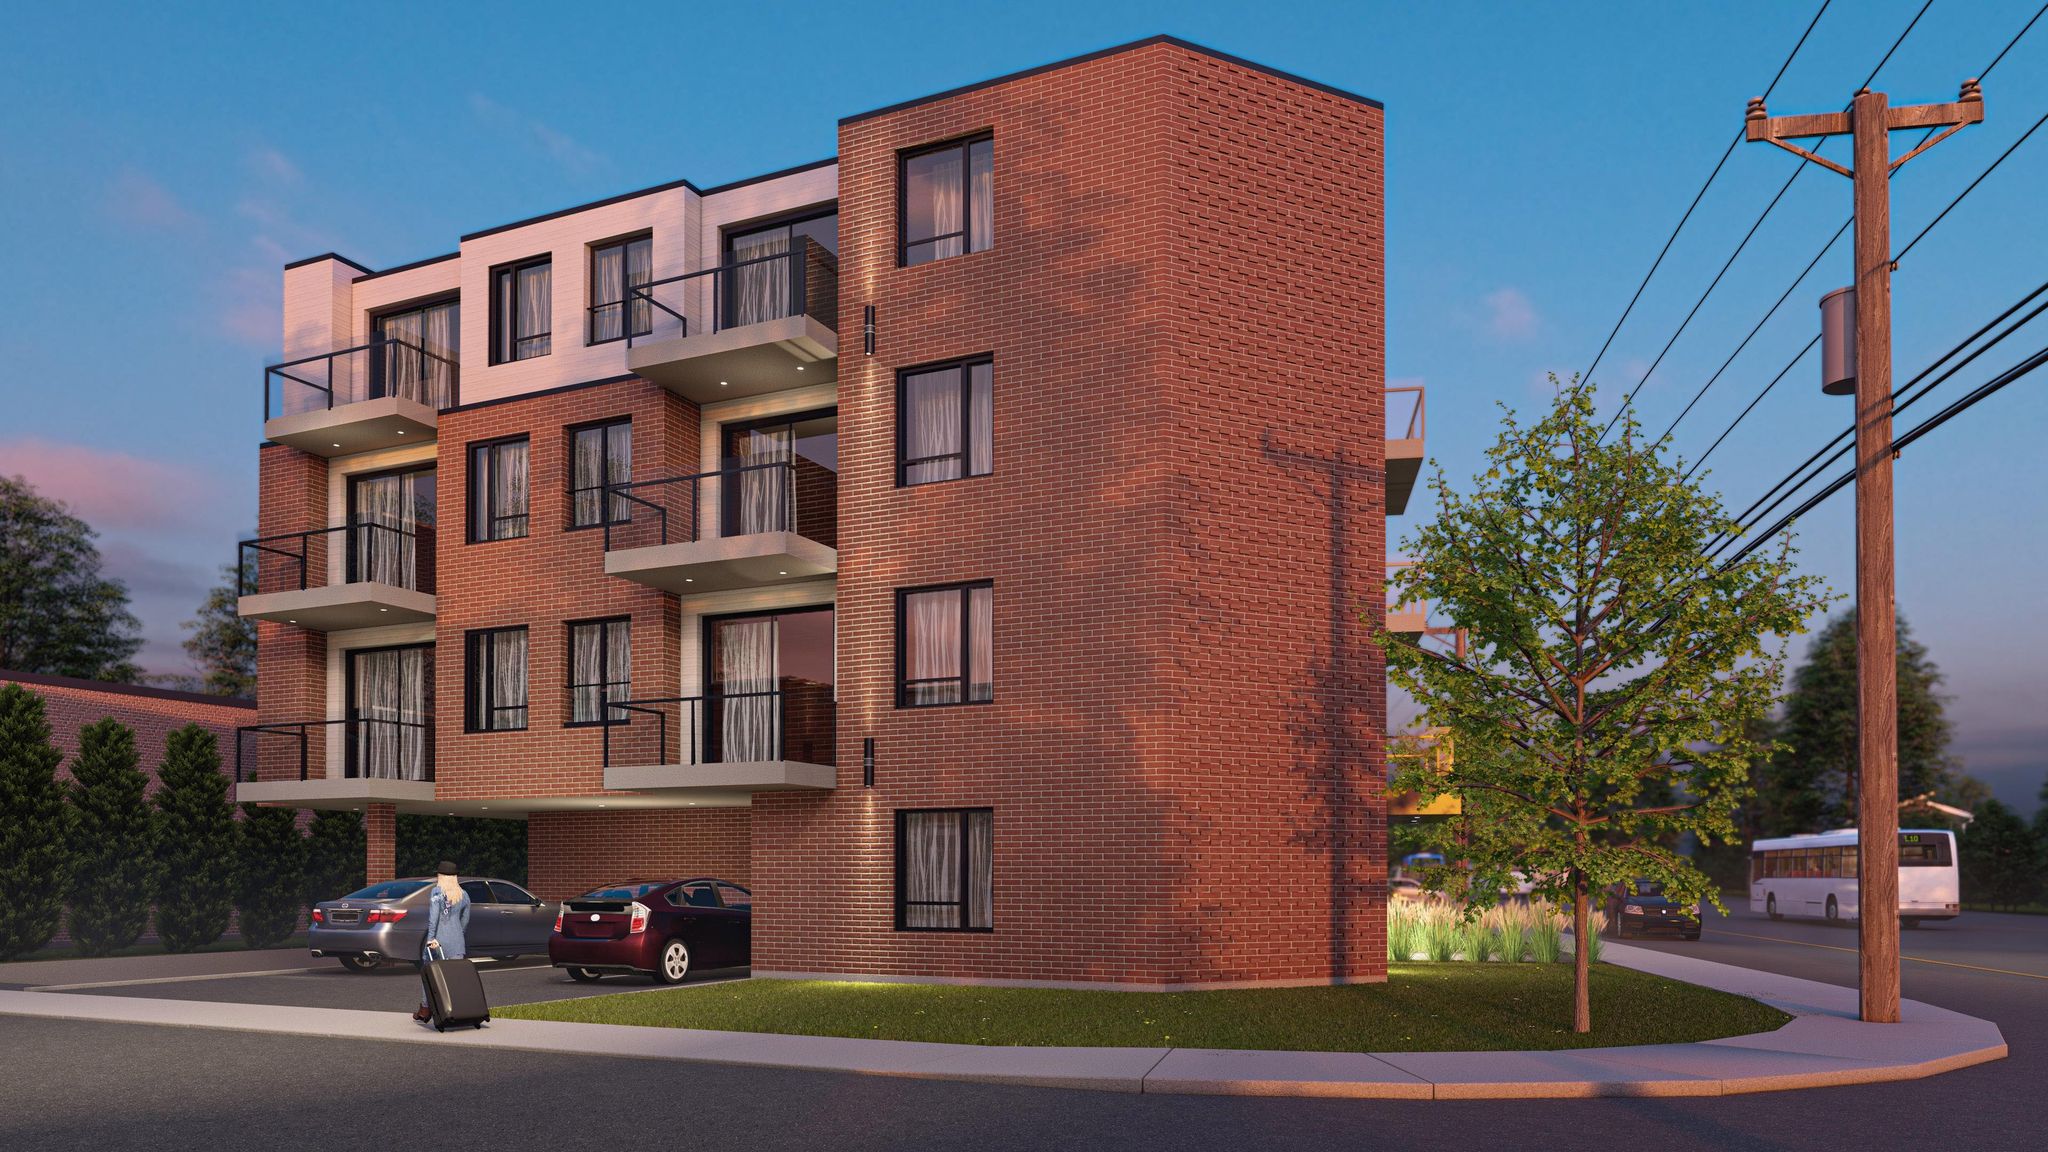 A 14 unit rental project in Lachine